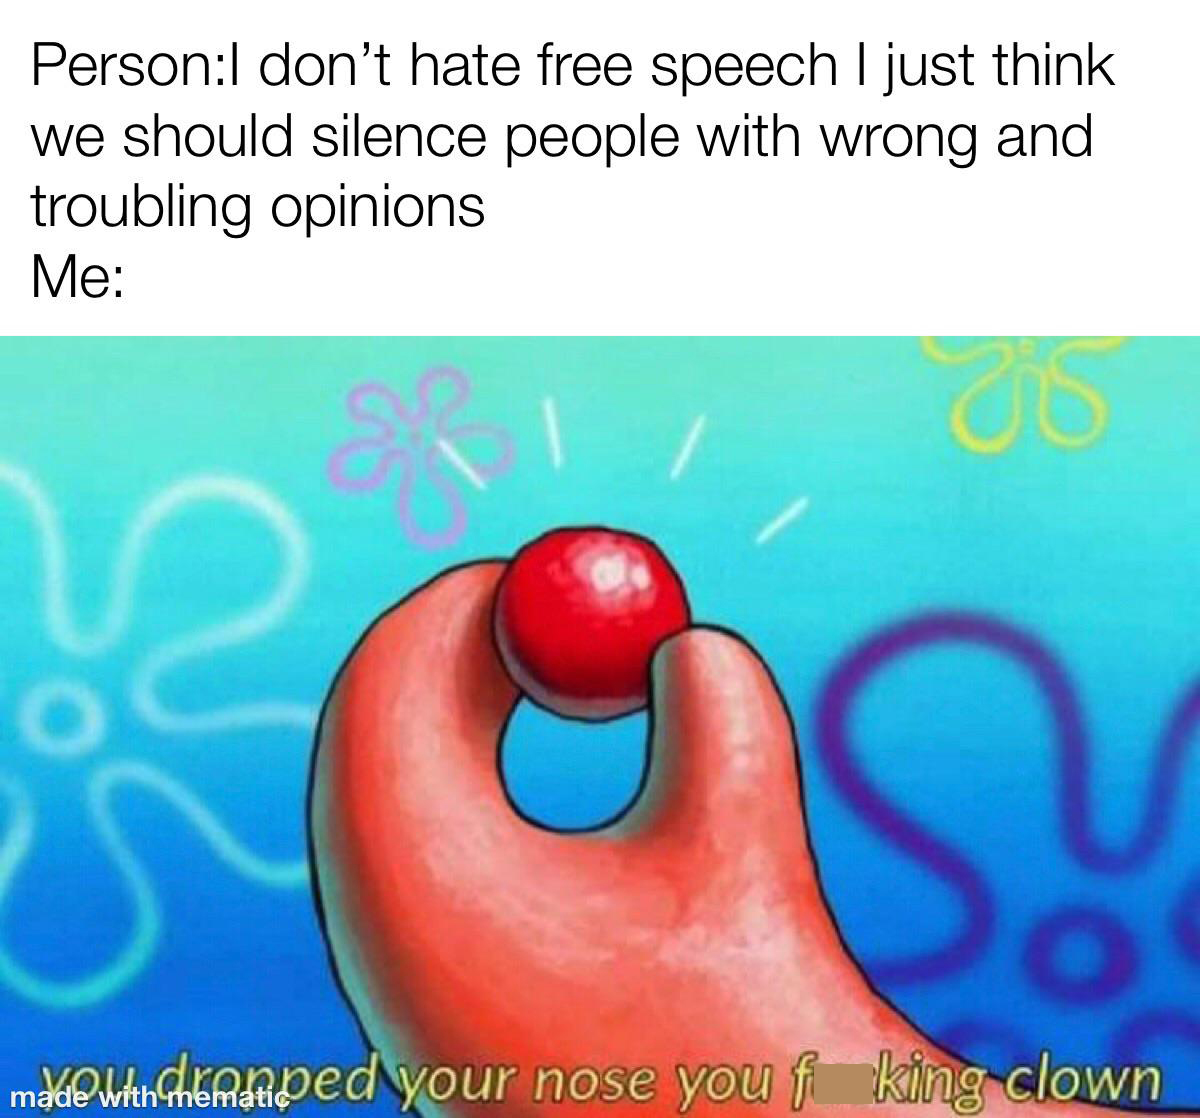 you dropped your nose clown - PersonI don't hate free speech I just think we should silence people with wrong and troubling opinions Me co S malounchermped your nose you f king clown